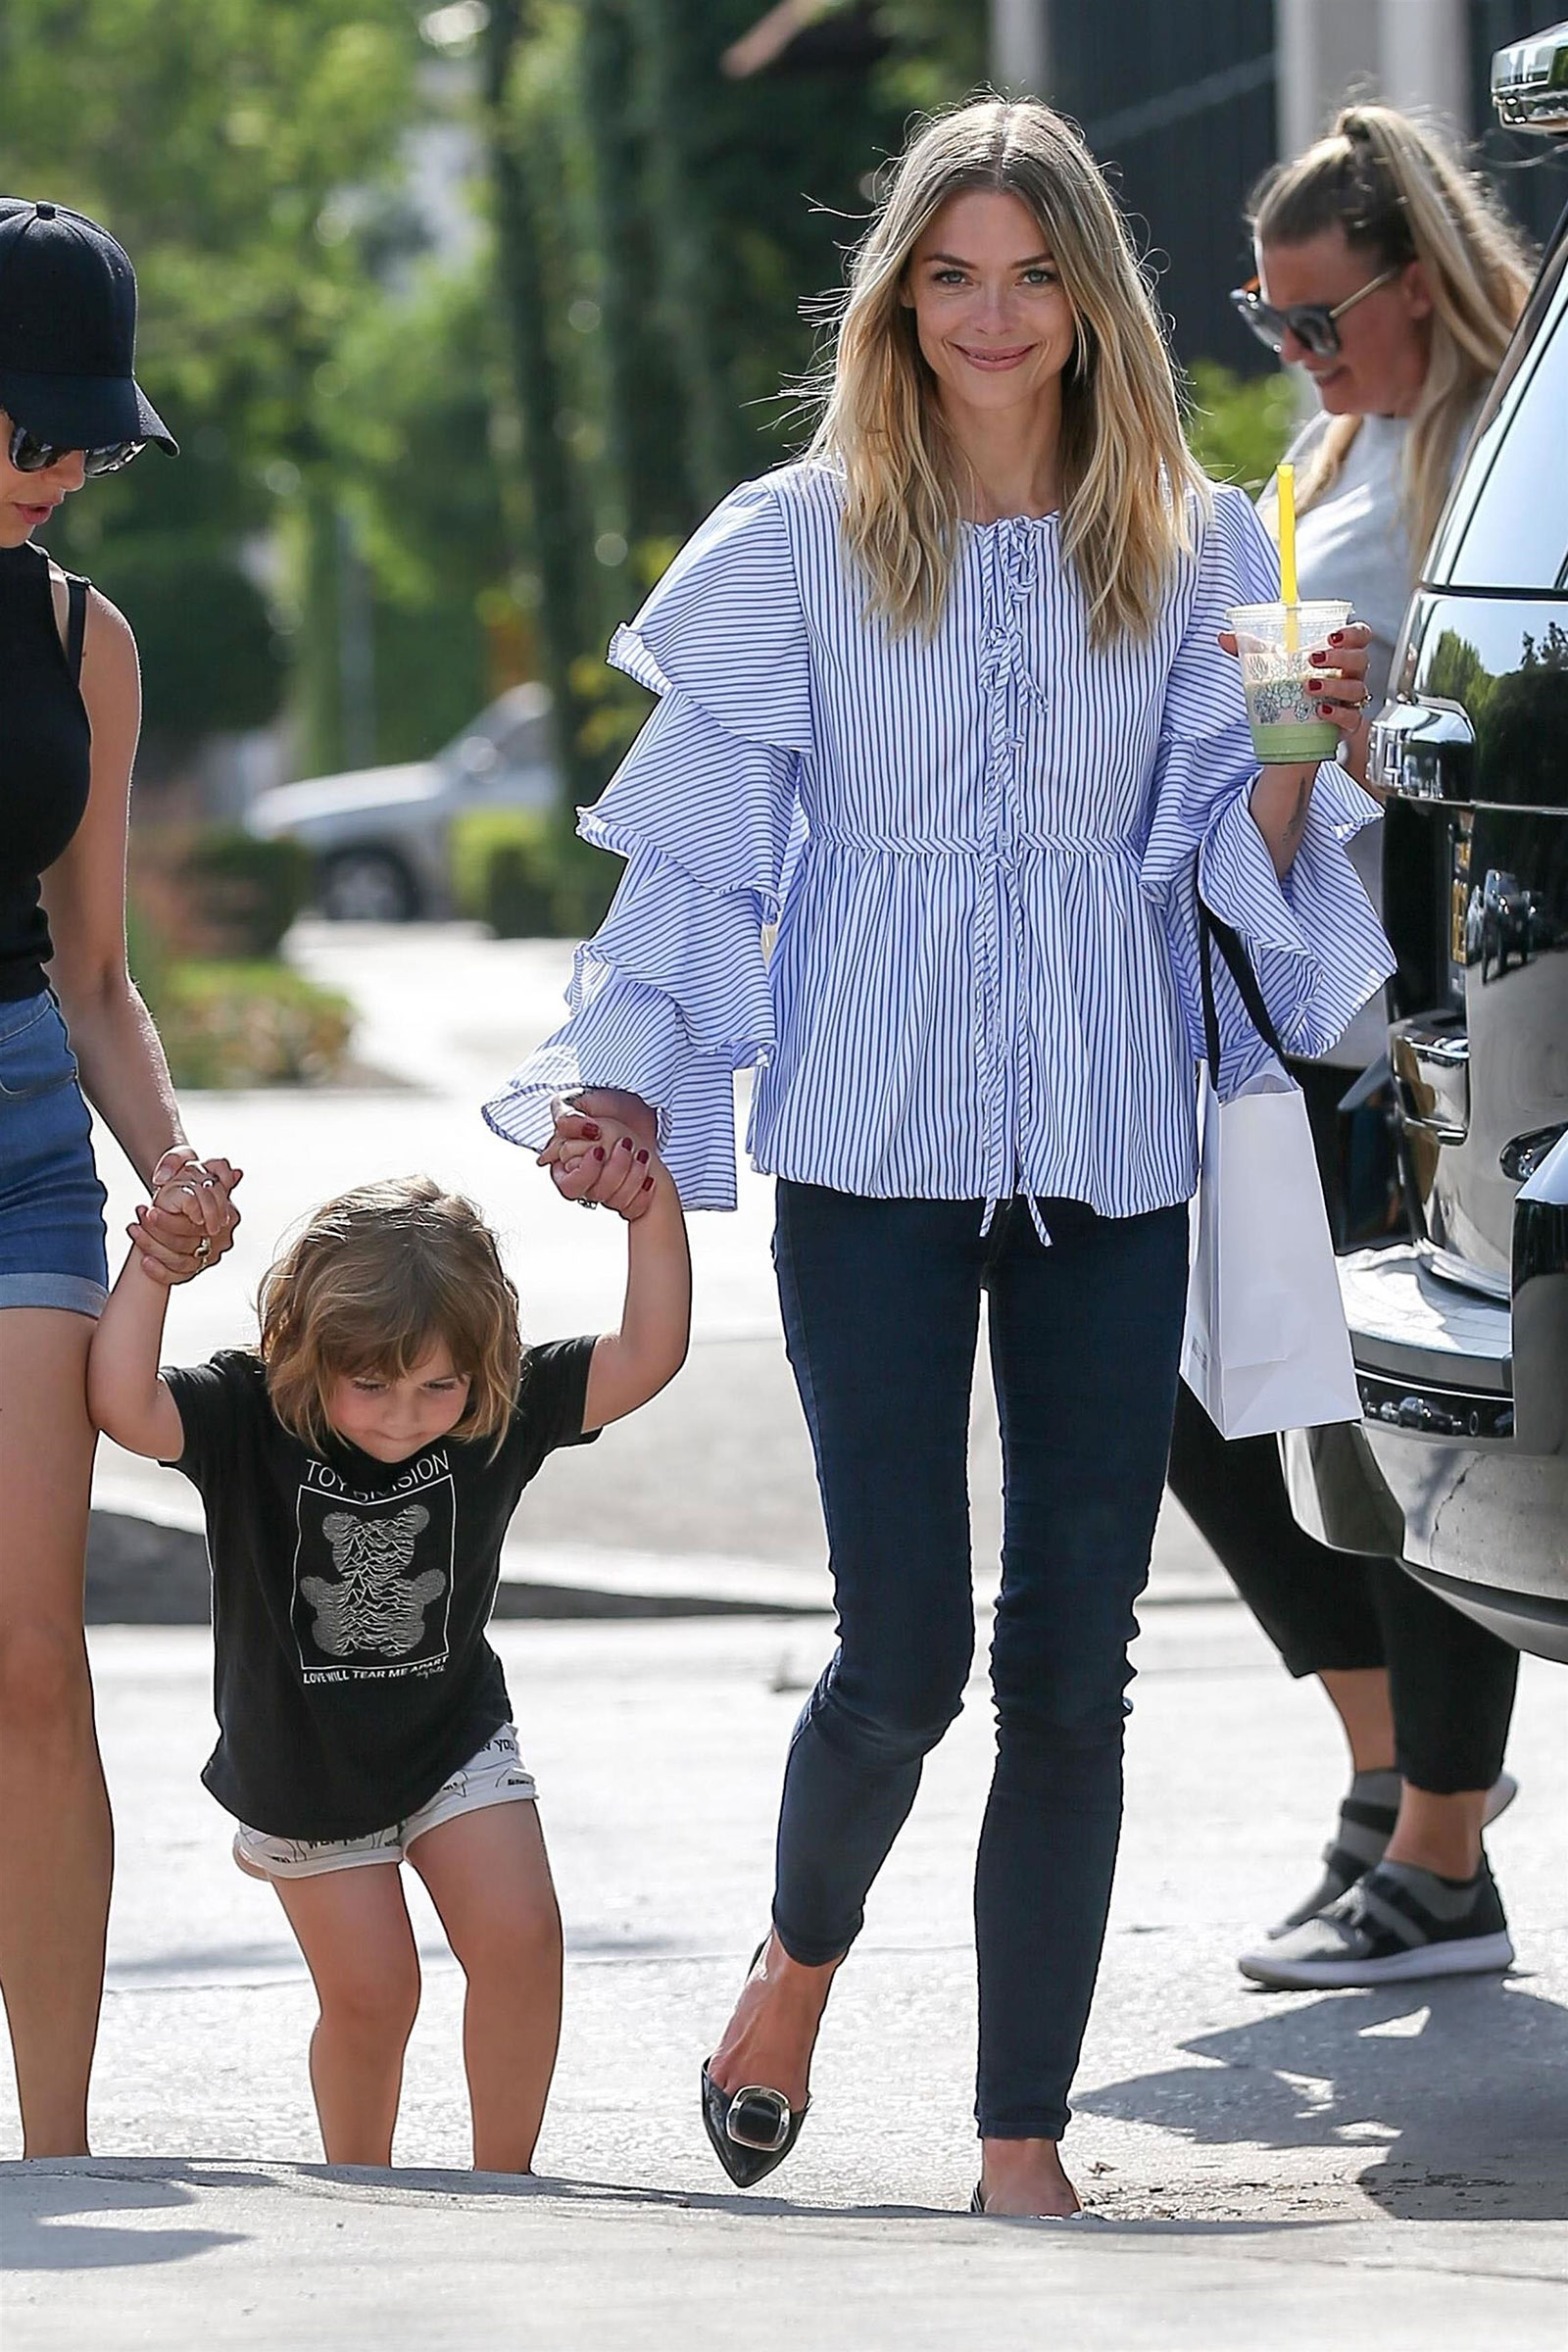 Jaime King wears a ruffle shirt and skinny jeans while shopping.